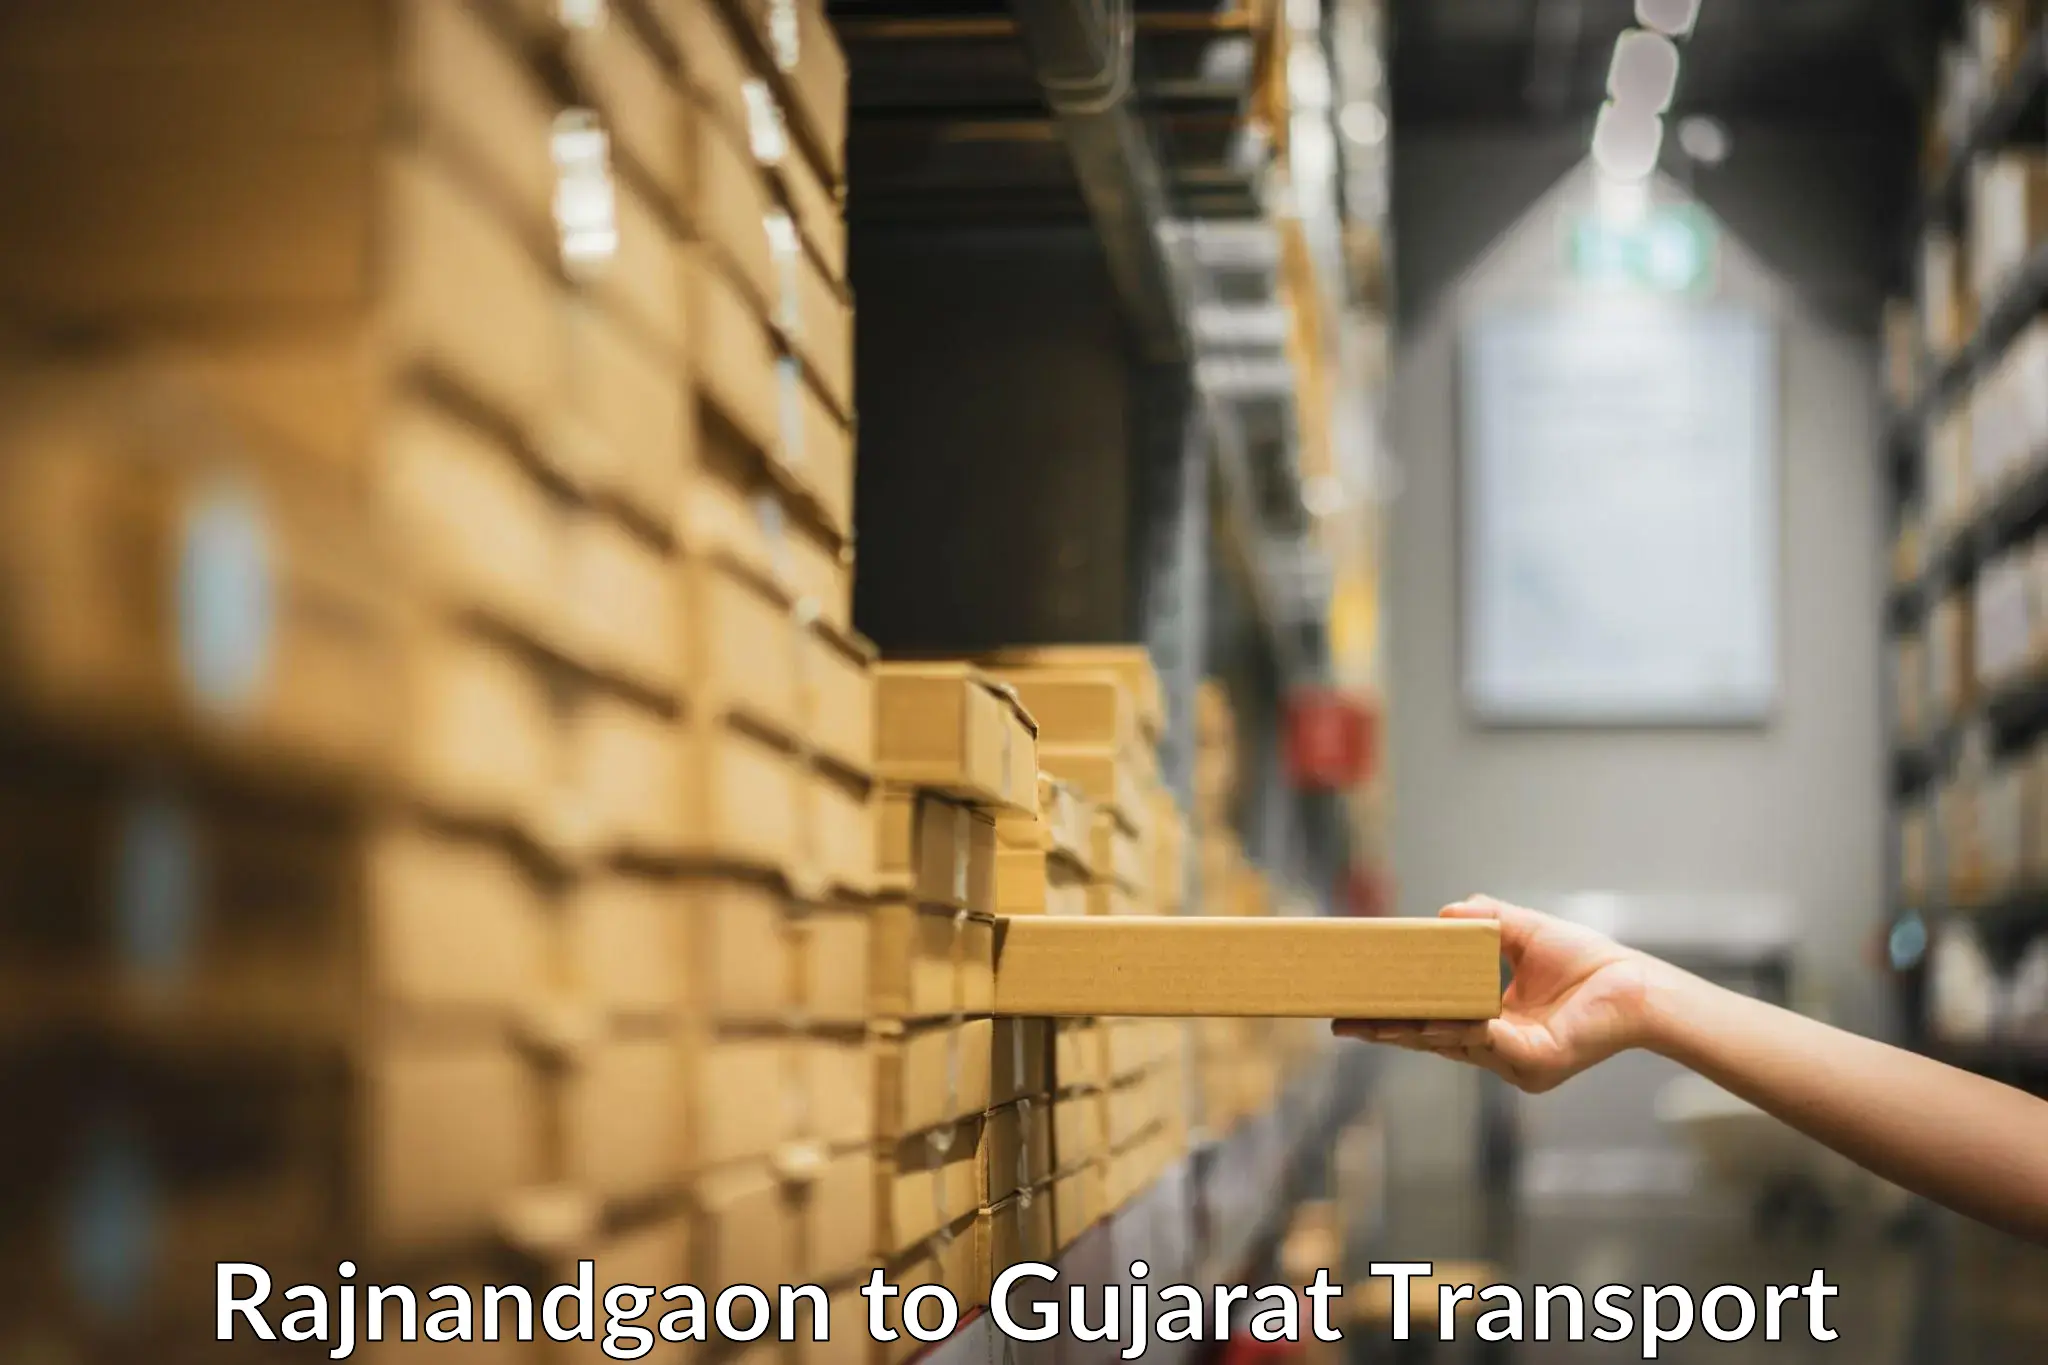 Road transport online services Rajnandgaon to Ahwa